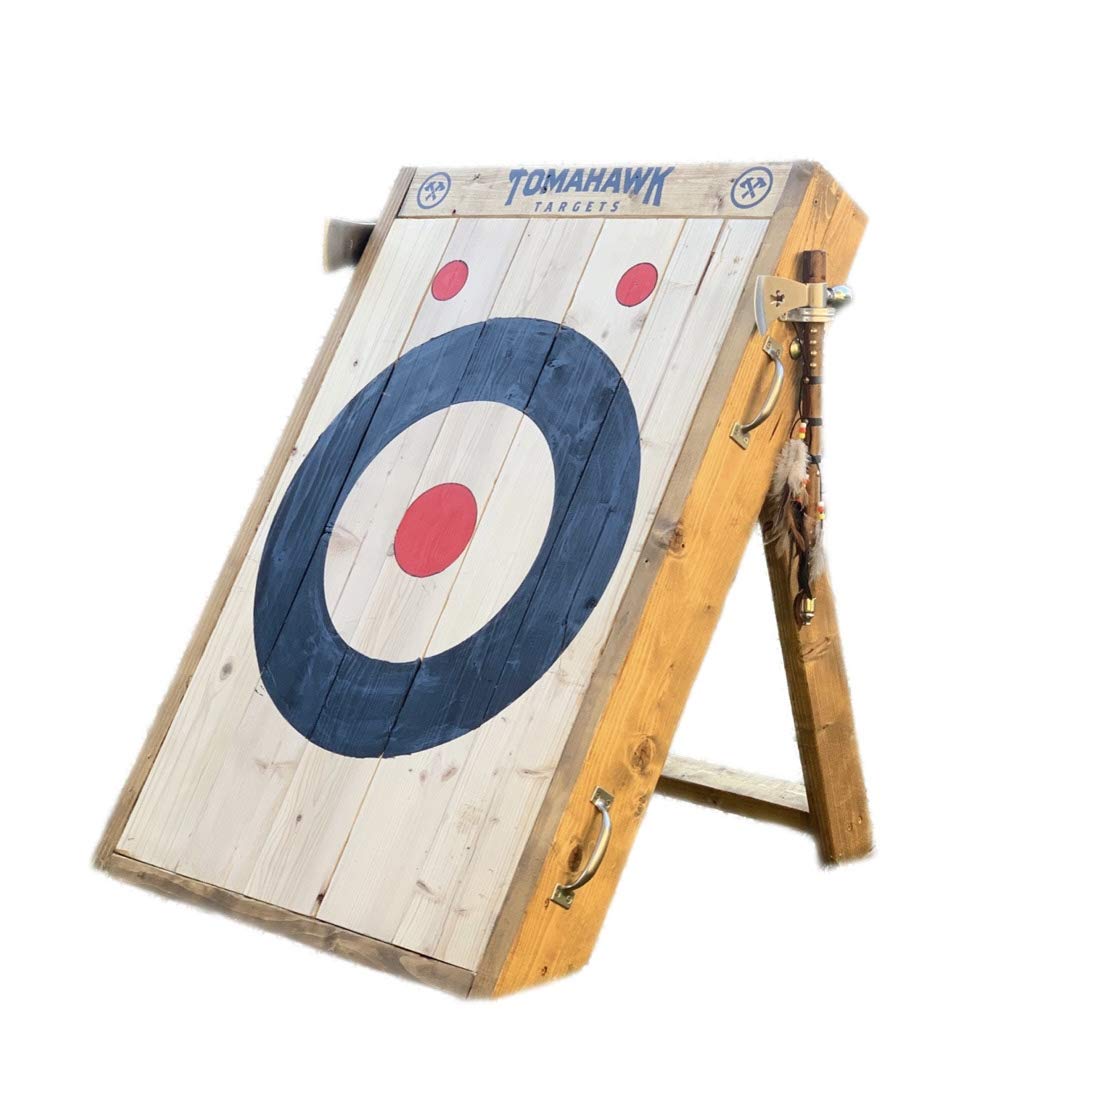 2-Ring Foldable Axe and Knife Throwing Target